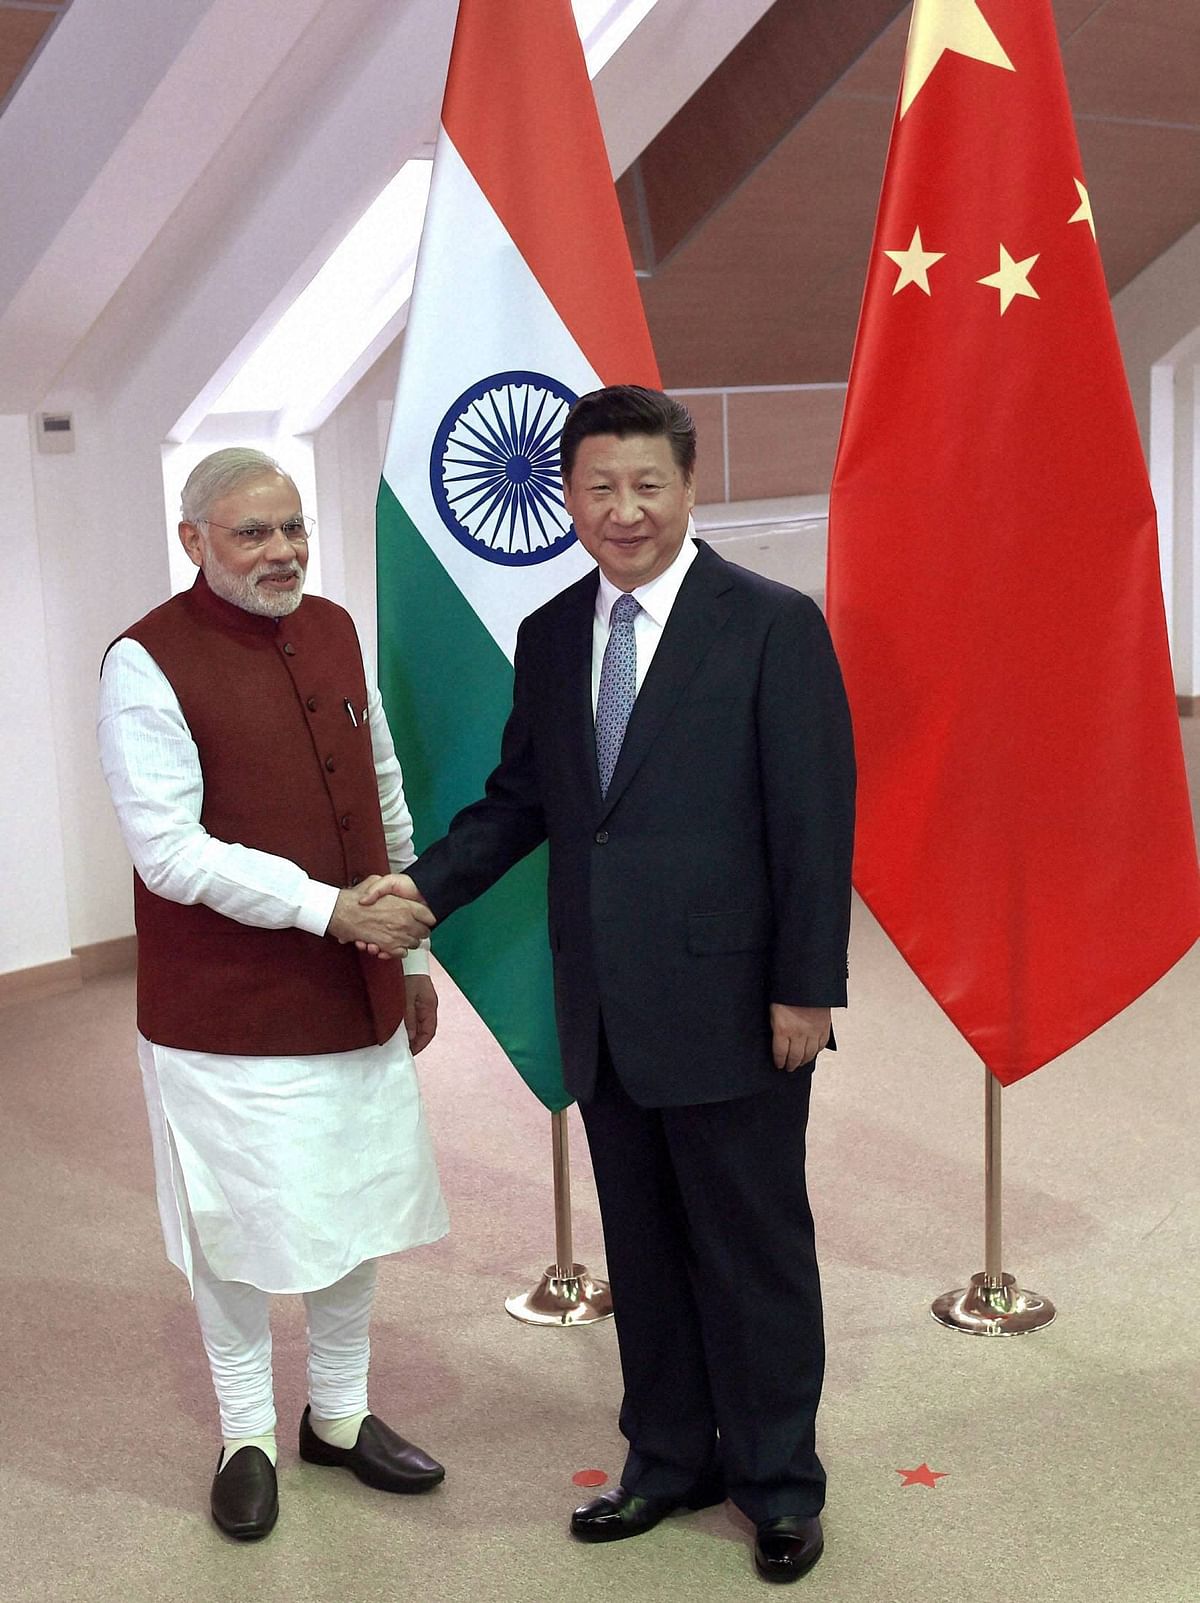 Modi and Jinping want to take bilateral ties to new heights, a day after the Lakhvi issue was raised.